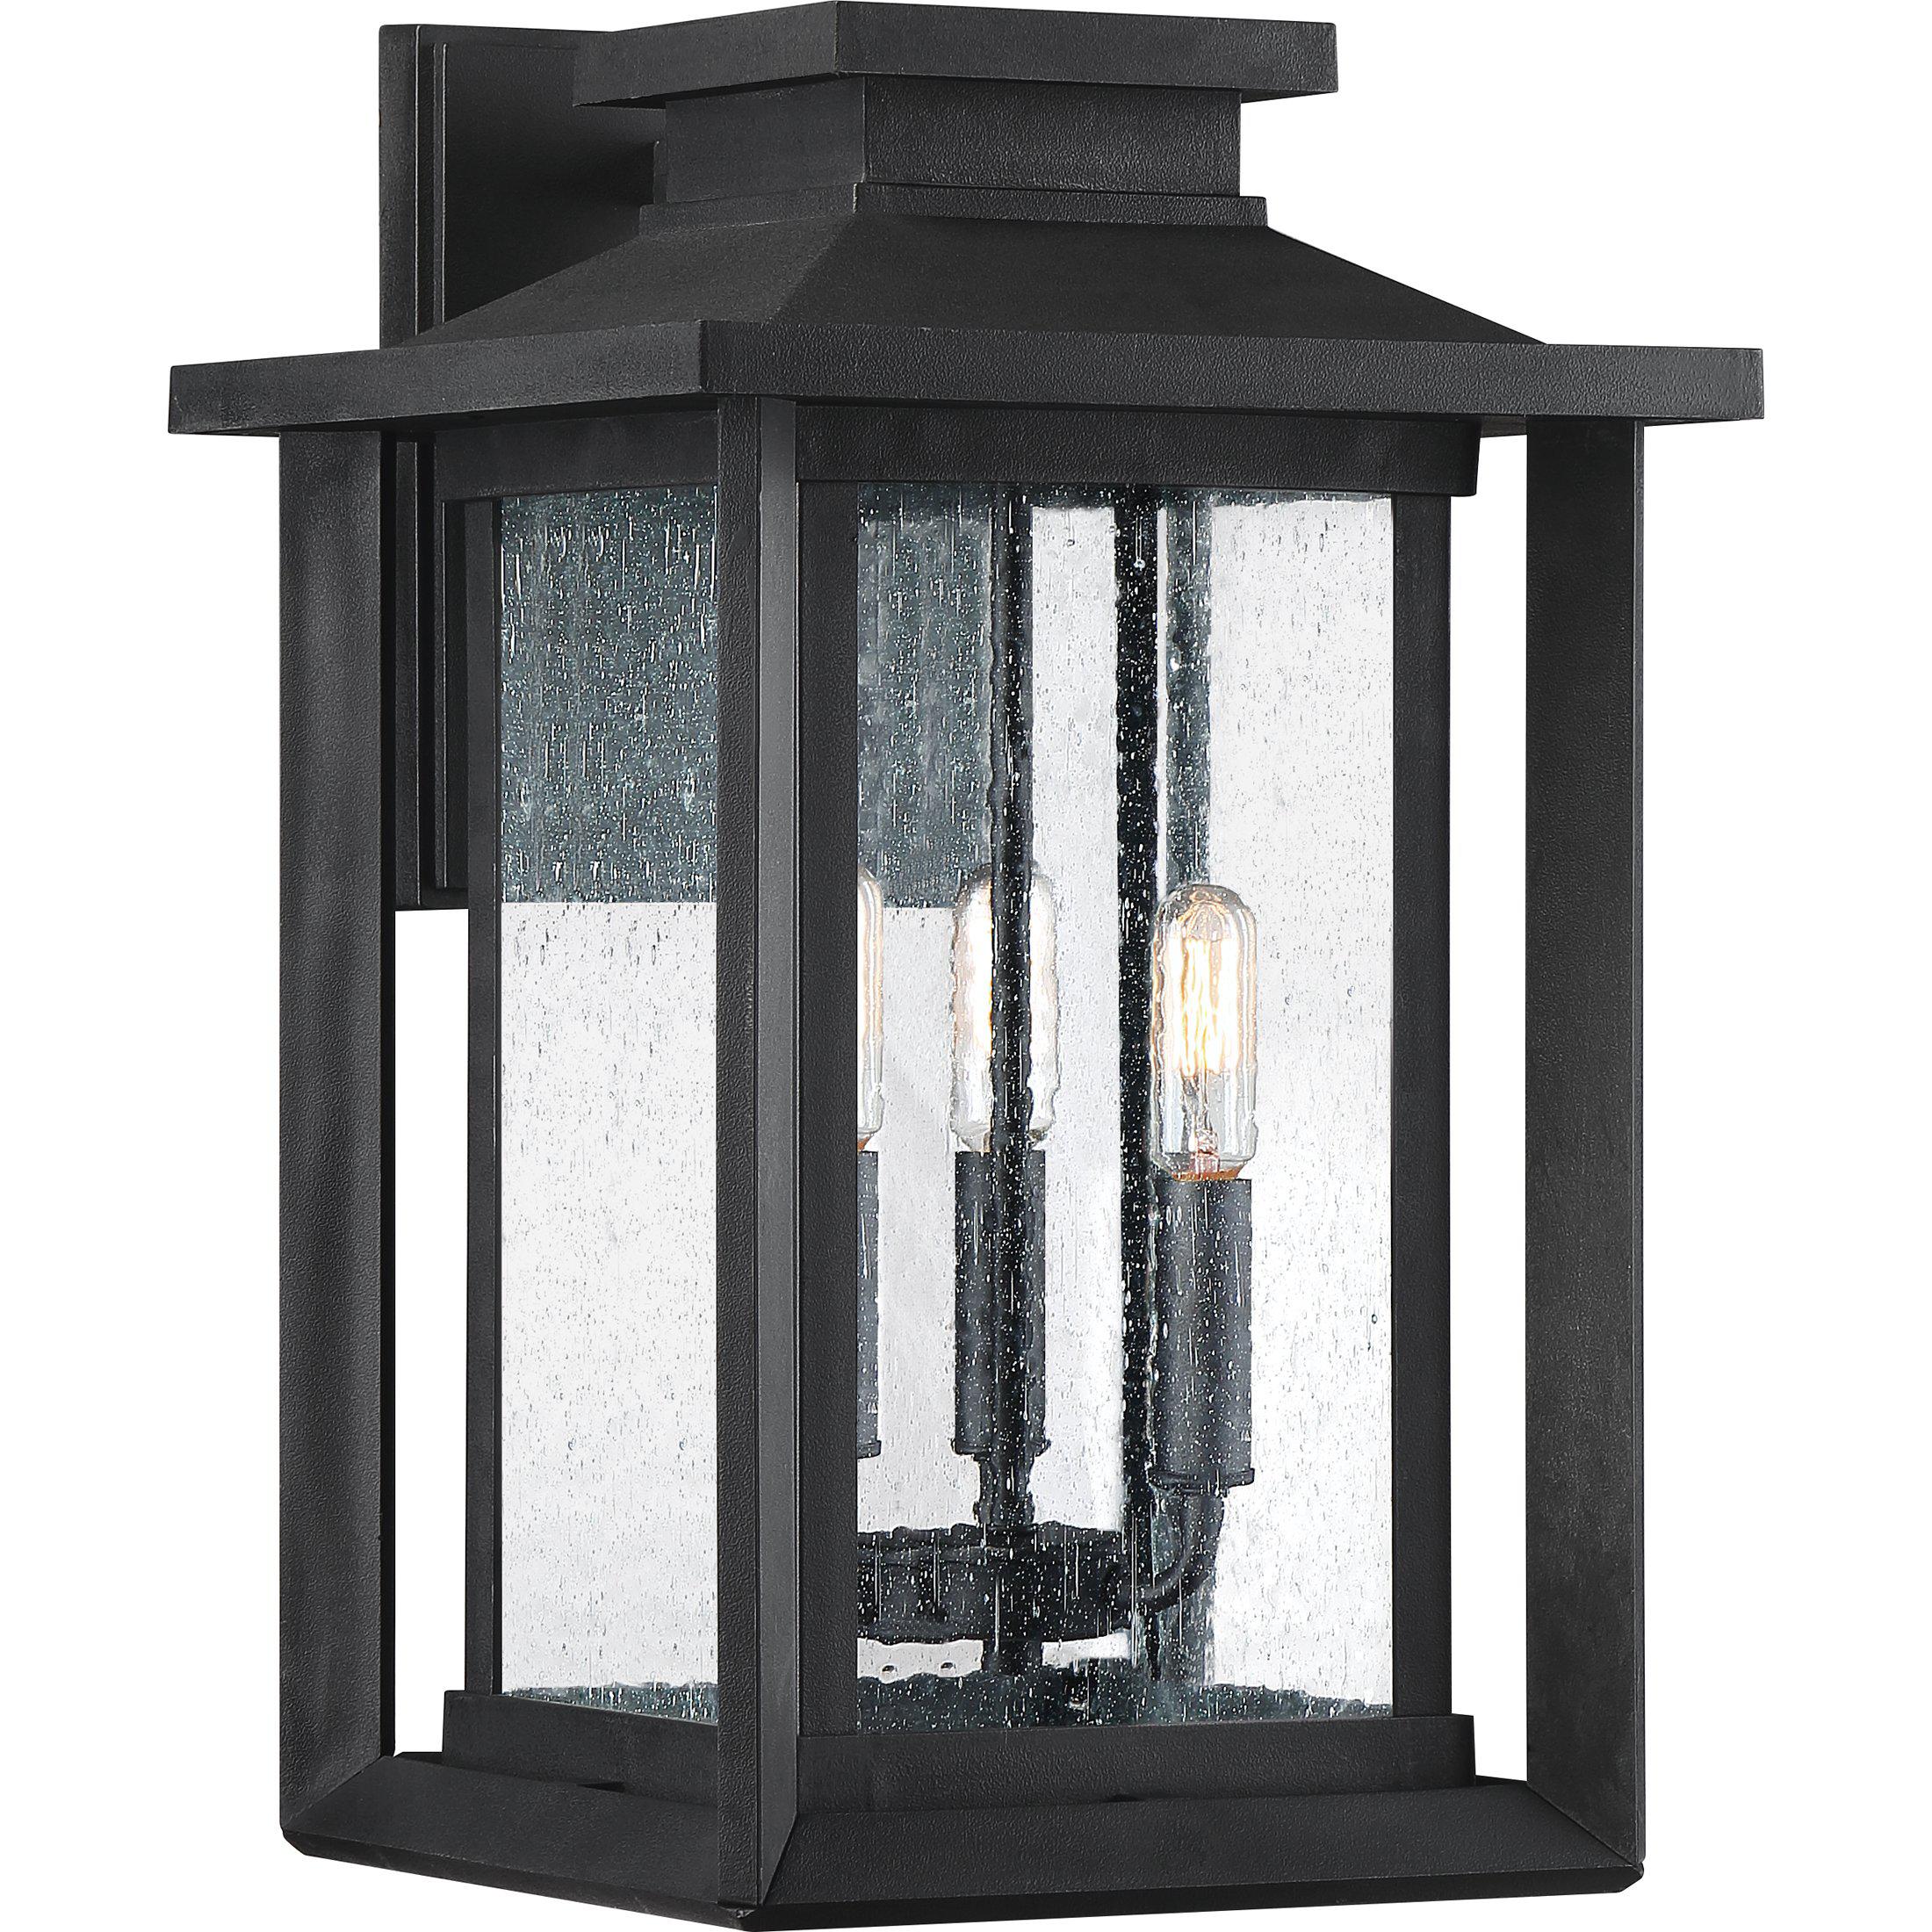 Quoizel  Wakefield Outdoor Lantern, Large Outdoor l Wall Quoizel Earth Black  